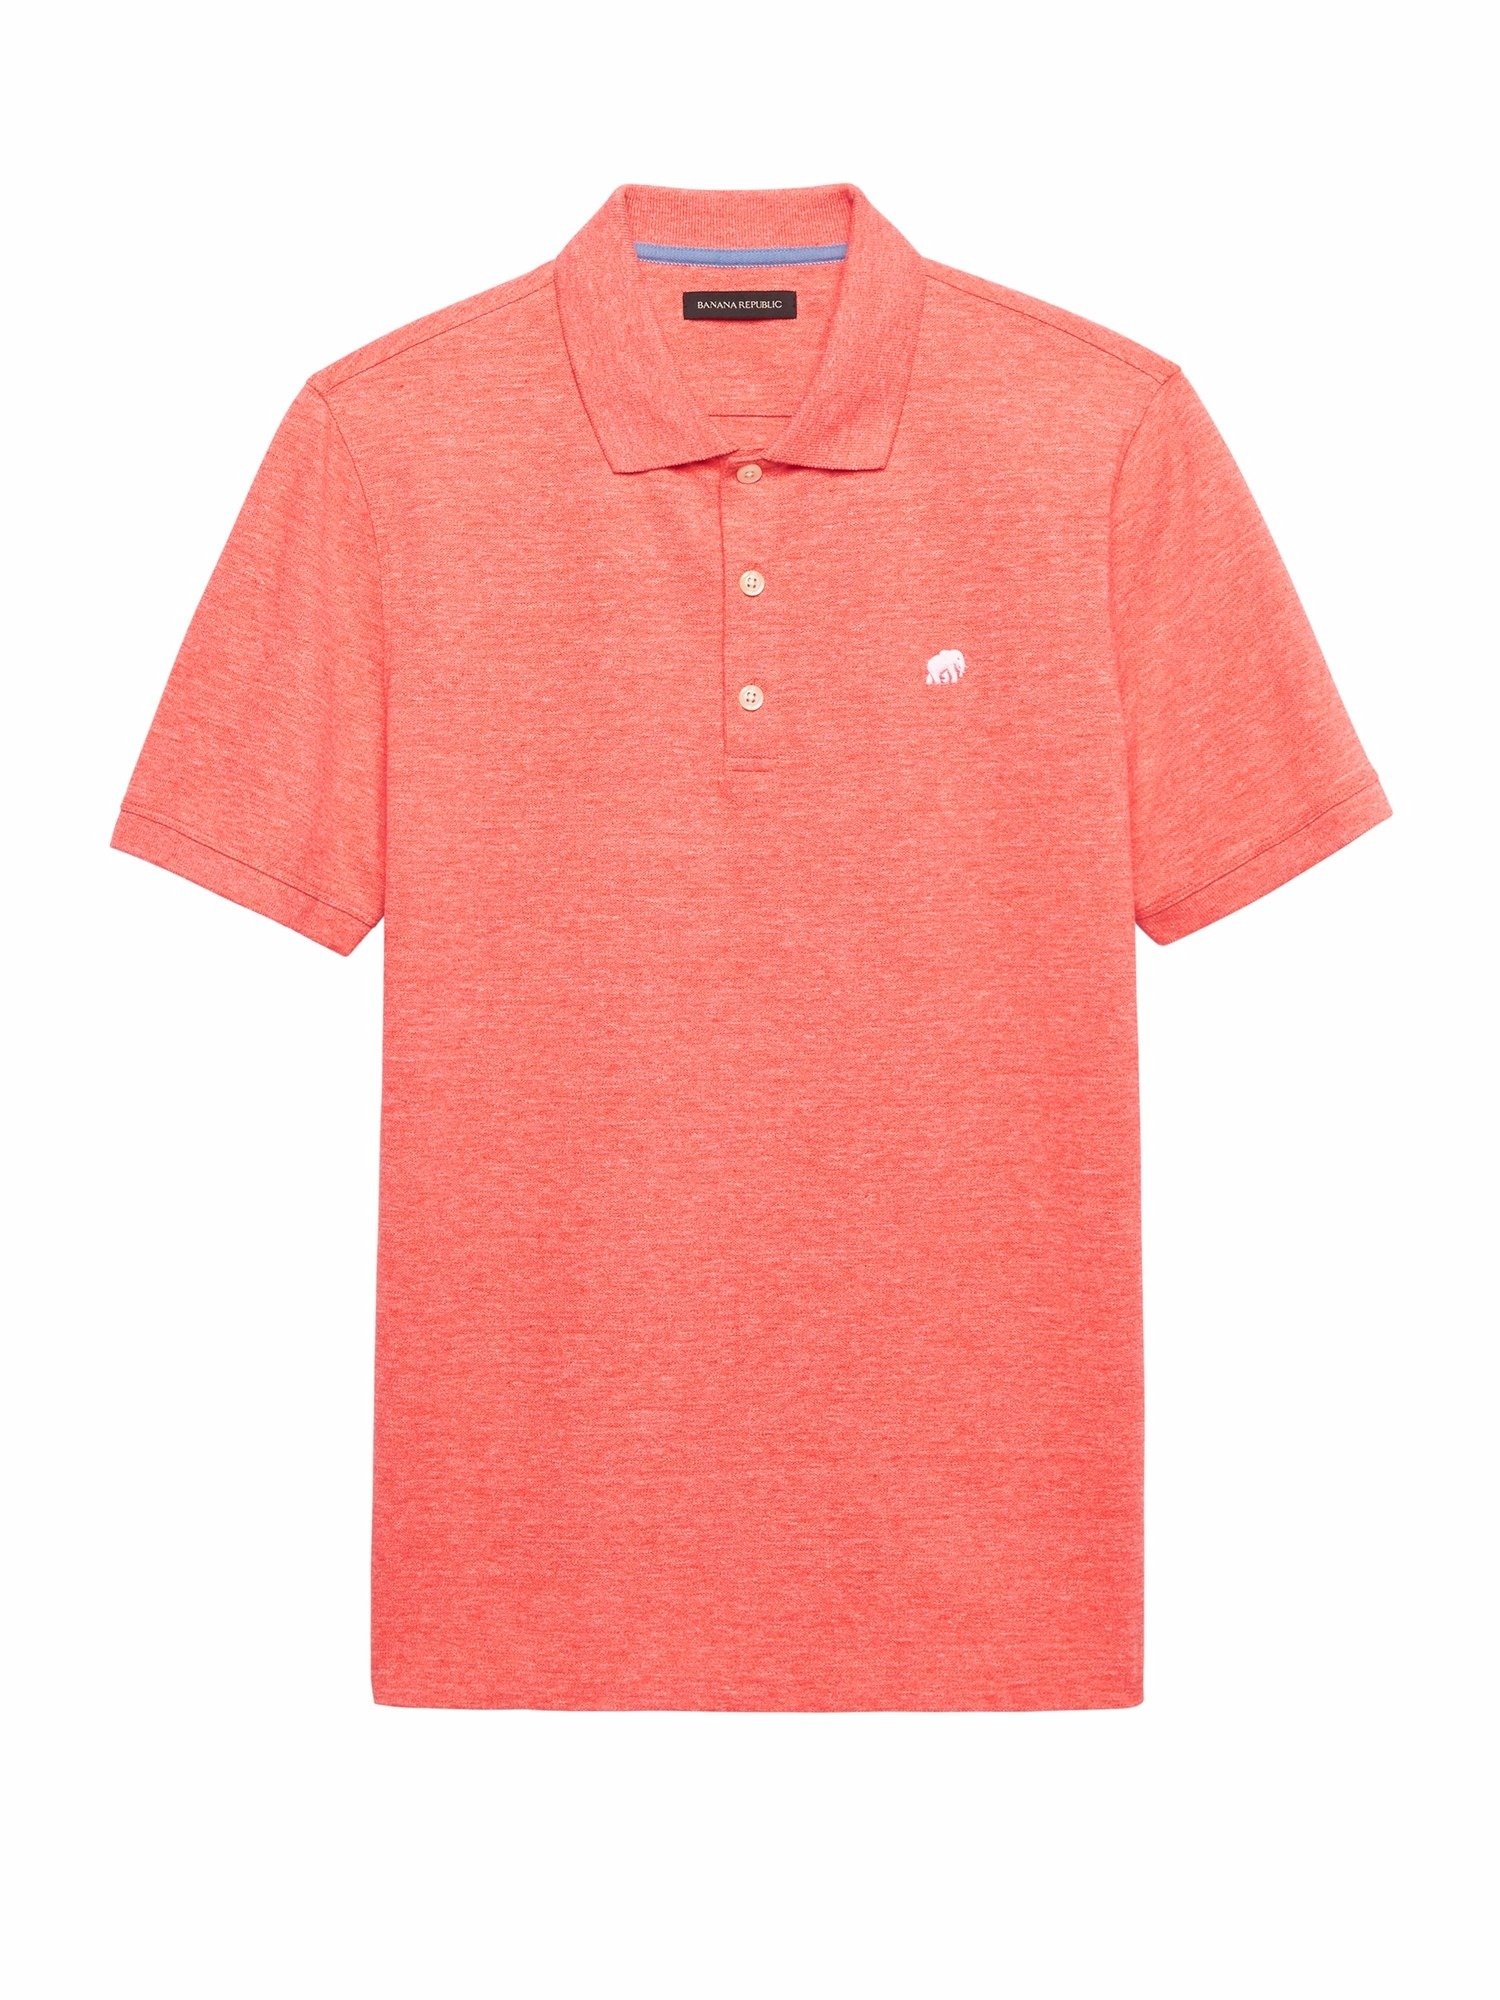 Solid Pique Polo T-Shirt product image